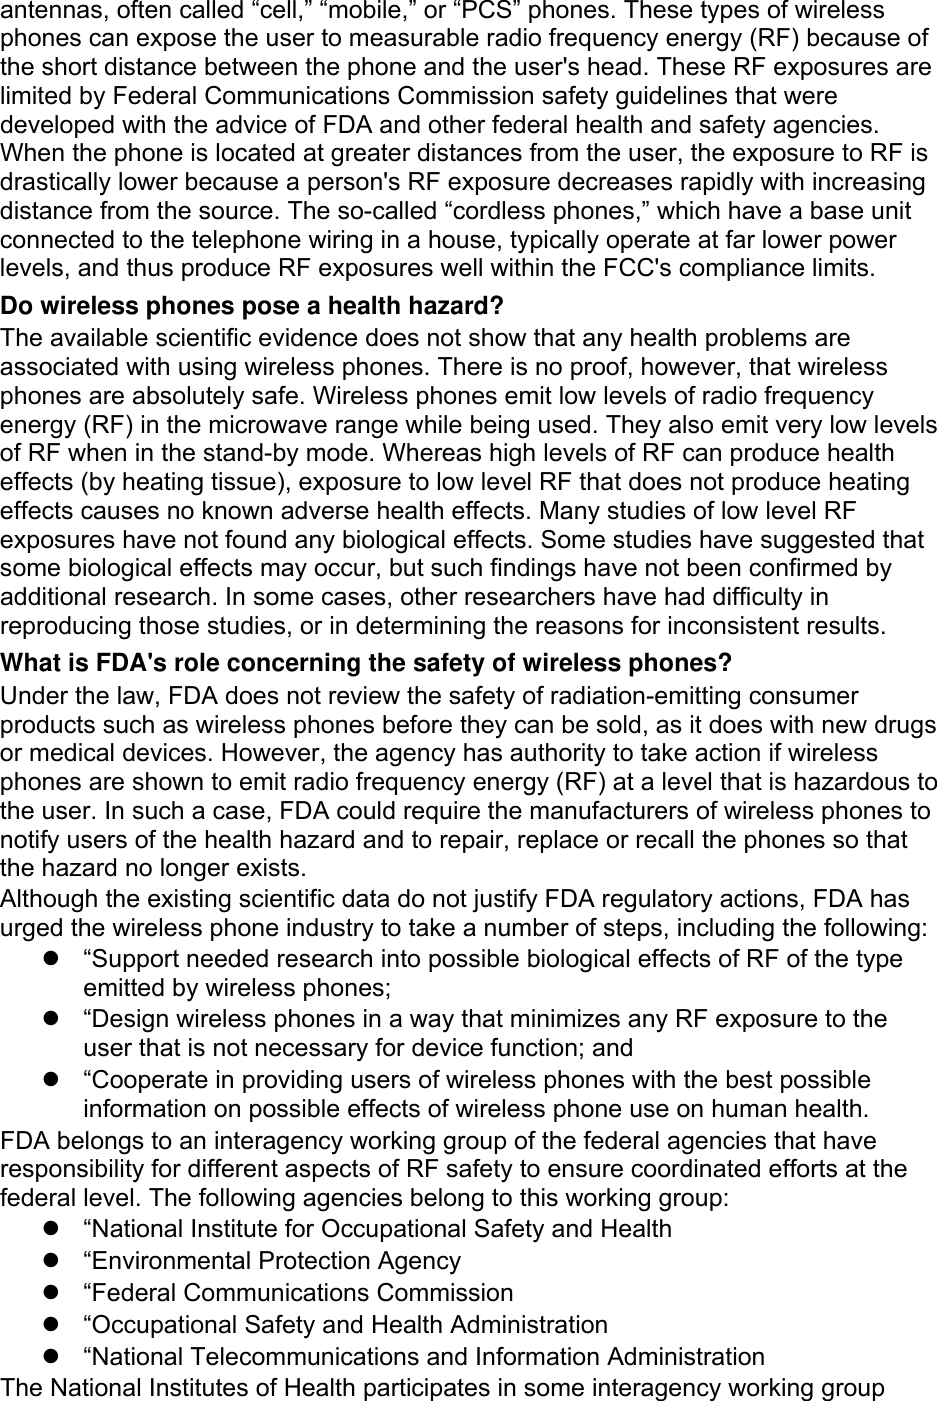 antennas, often called “cell,” “mobile,” or “PCS” phones. These types of wireless phones can expose the user to measurable radio frequency energy (RF) because of the short distance between the phone and the user&apos;s head. These RF exposures are limited by Federal Communications Commission safety guidelines that were developed with the advice of FDA and other federal health and safety agencies. When the phone is located at greater distances from the user, the exposure to RF is drastically lower because a person&apos;s RF exposure decreases rapidly with increasing distance from the source. The so-called “cordless phones,” which have a base unit connected to the telephone wiring in a house, typically operate at far lower power levels, and thus produce RF exposures well within the FCC&apos;s compliance limits. Do wireless phones pose a health hazard? The available scientific evidence does not show that any health problems are associated with using wireless phones. There is no proof, however, that wireless phones are absolutely safe. Wireless phones emit low levels of radio frequency energy (RF) in the microwave range while being used. They also emit very low levels of RF when in the stand-by mode. Whereas high levels of RF can produce health effects (by heating tissue), exposure to low level RF that does not produce heating effects causes no known adverse health effects. Many studies of low level RF exposures have not found any biological effects. Some studies have suggested that some biological effects may occur, but such findings have not been confirmed by additional research. In some cases, other researchers have had difficulty in reproducing those studies, or in determining the reasons for inconsistent results. What is FDA&apos;s role concerning the safety of wireless phones? Under the law, FDA does not review the safety of radiation-emitting consumer products such as wireless phones before they can be sold, as it does with new drugs or medical devices. However, the agency has authority to take action if wireless phones are shown to emit radio frequency energy (RF) at a level that is hazardous to the user. In such a case, FDA could require the manufacturers of wireless phones to notify users of the health hazard and to repair, replace or recall the phones so that the hazard no longer exists. Although the existing scientific data do not justify FDA regulatory actions, FDA has urged the wireless phone industry to take a number of steps, including the following: z  “Support needed research into possible biological effects of RF of the type emitted by wireless phones; z  “Design wireless phones in a way that minimizes any RF exposure to the user that is not necessary for device function; and z  “Cooperate in providing users of wireless phones with the best possible information on possible effects of wireless phone use on human health. FDA belongs to an interagency working group of the federal agencies that have responsibility for different aspects of RF safety to ensure coordinated efforts at the federal level. The following agencies belong to this working group: z  “National Institute for Occupational Safety and Health z  “Environmental Protection Agency z  “Federal Communications Commission z  “Occupational Safety and Health Administration z “National Telecommunications and Information Administration The National Institutes of Health participates in some interagency working group 